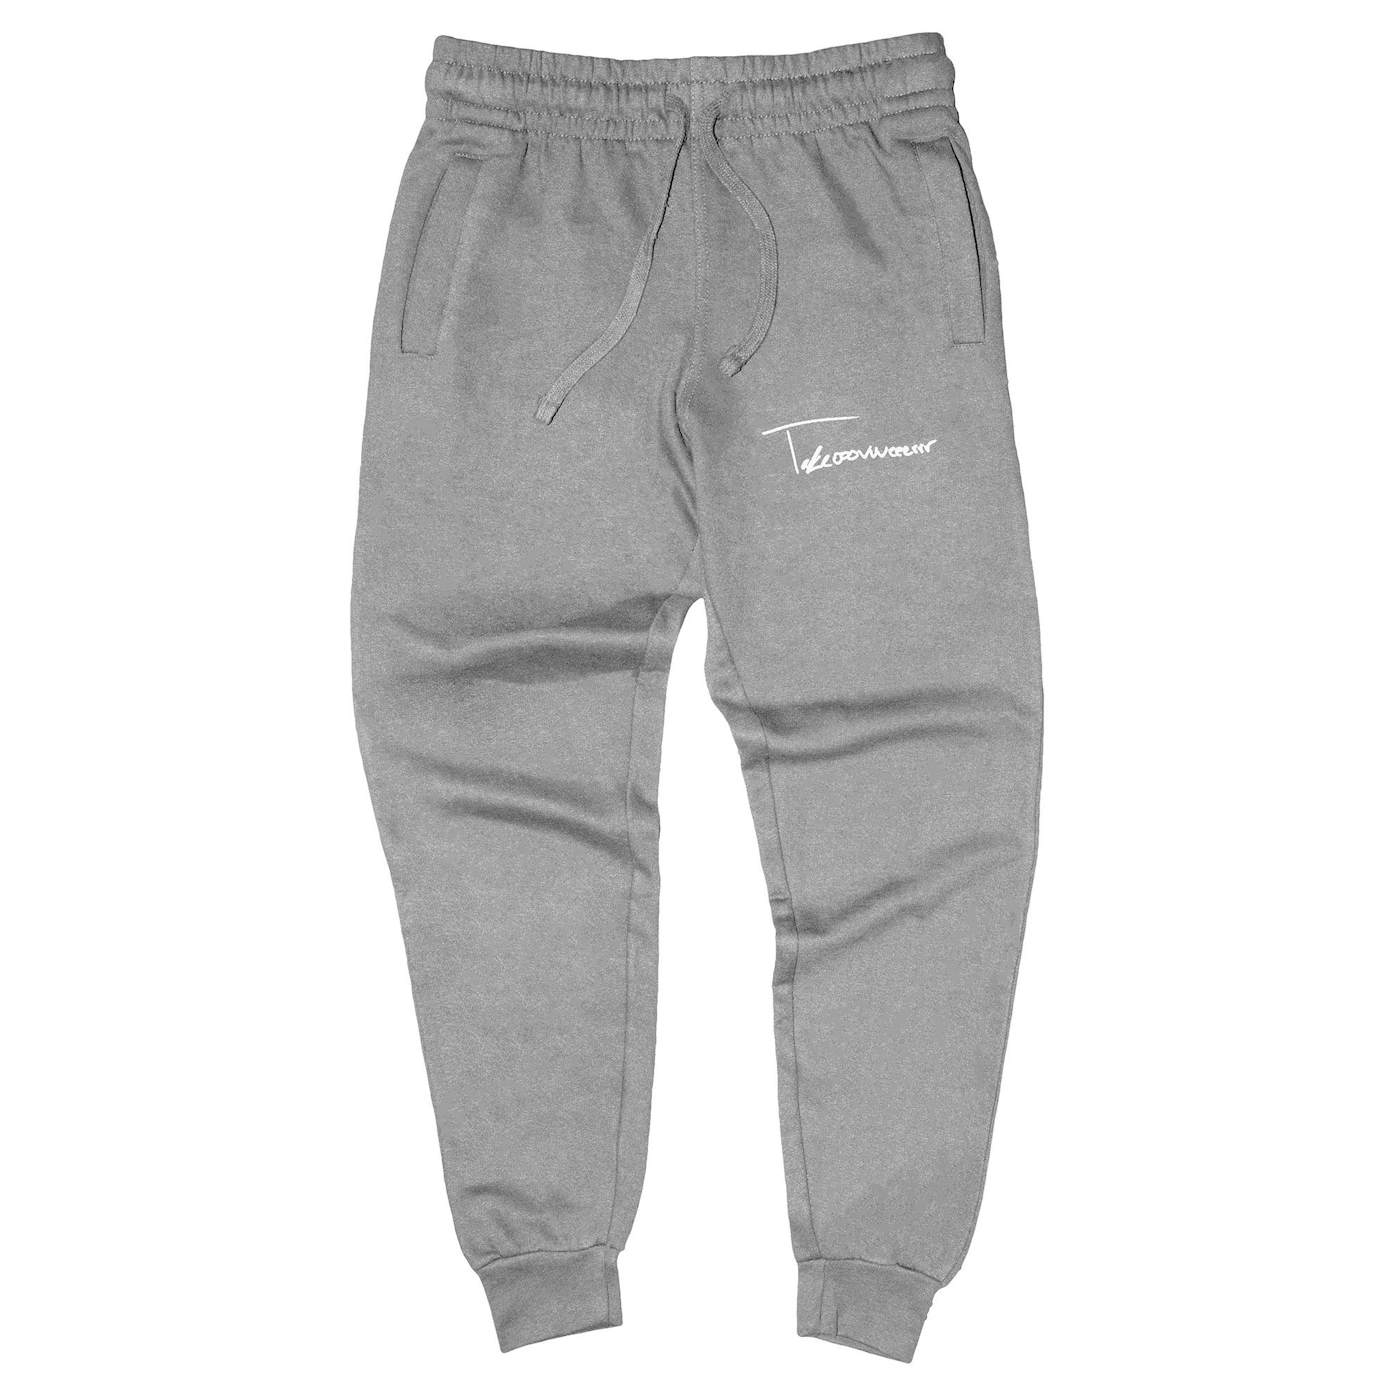 Taylor J Takeover Signature Sweatpants (Grey/White)